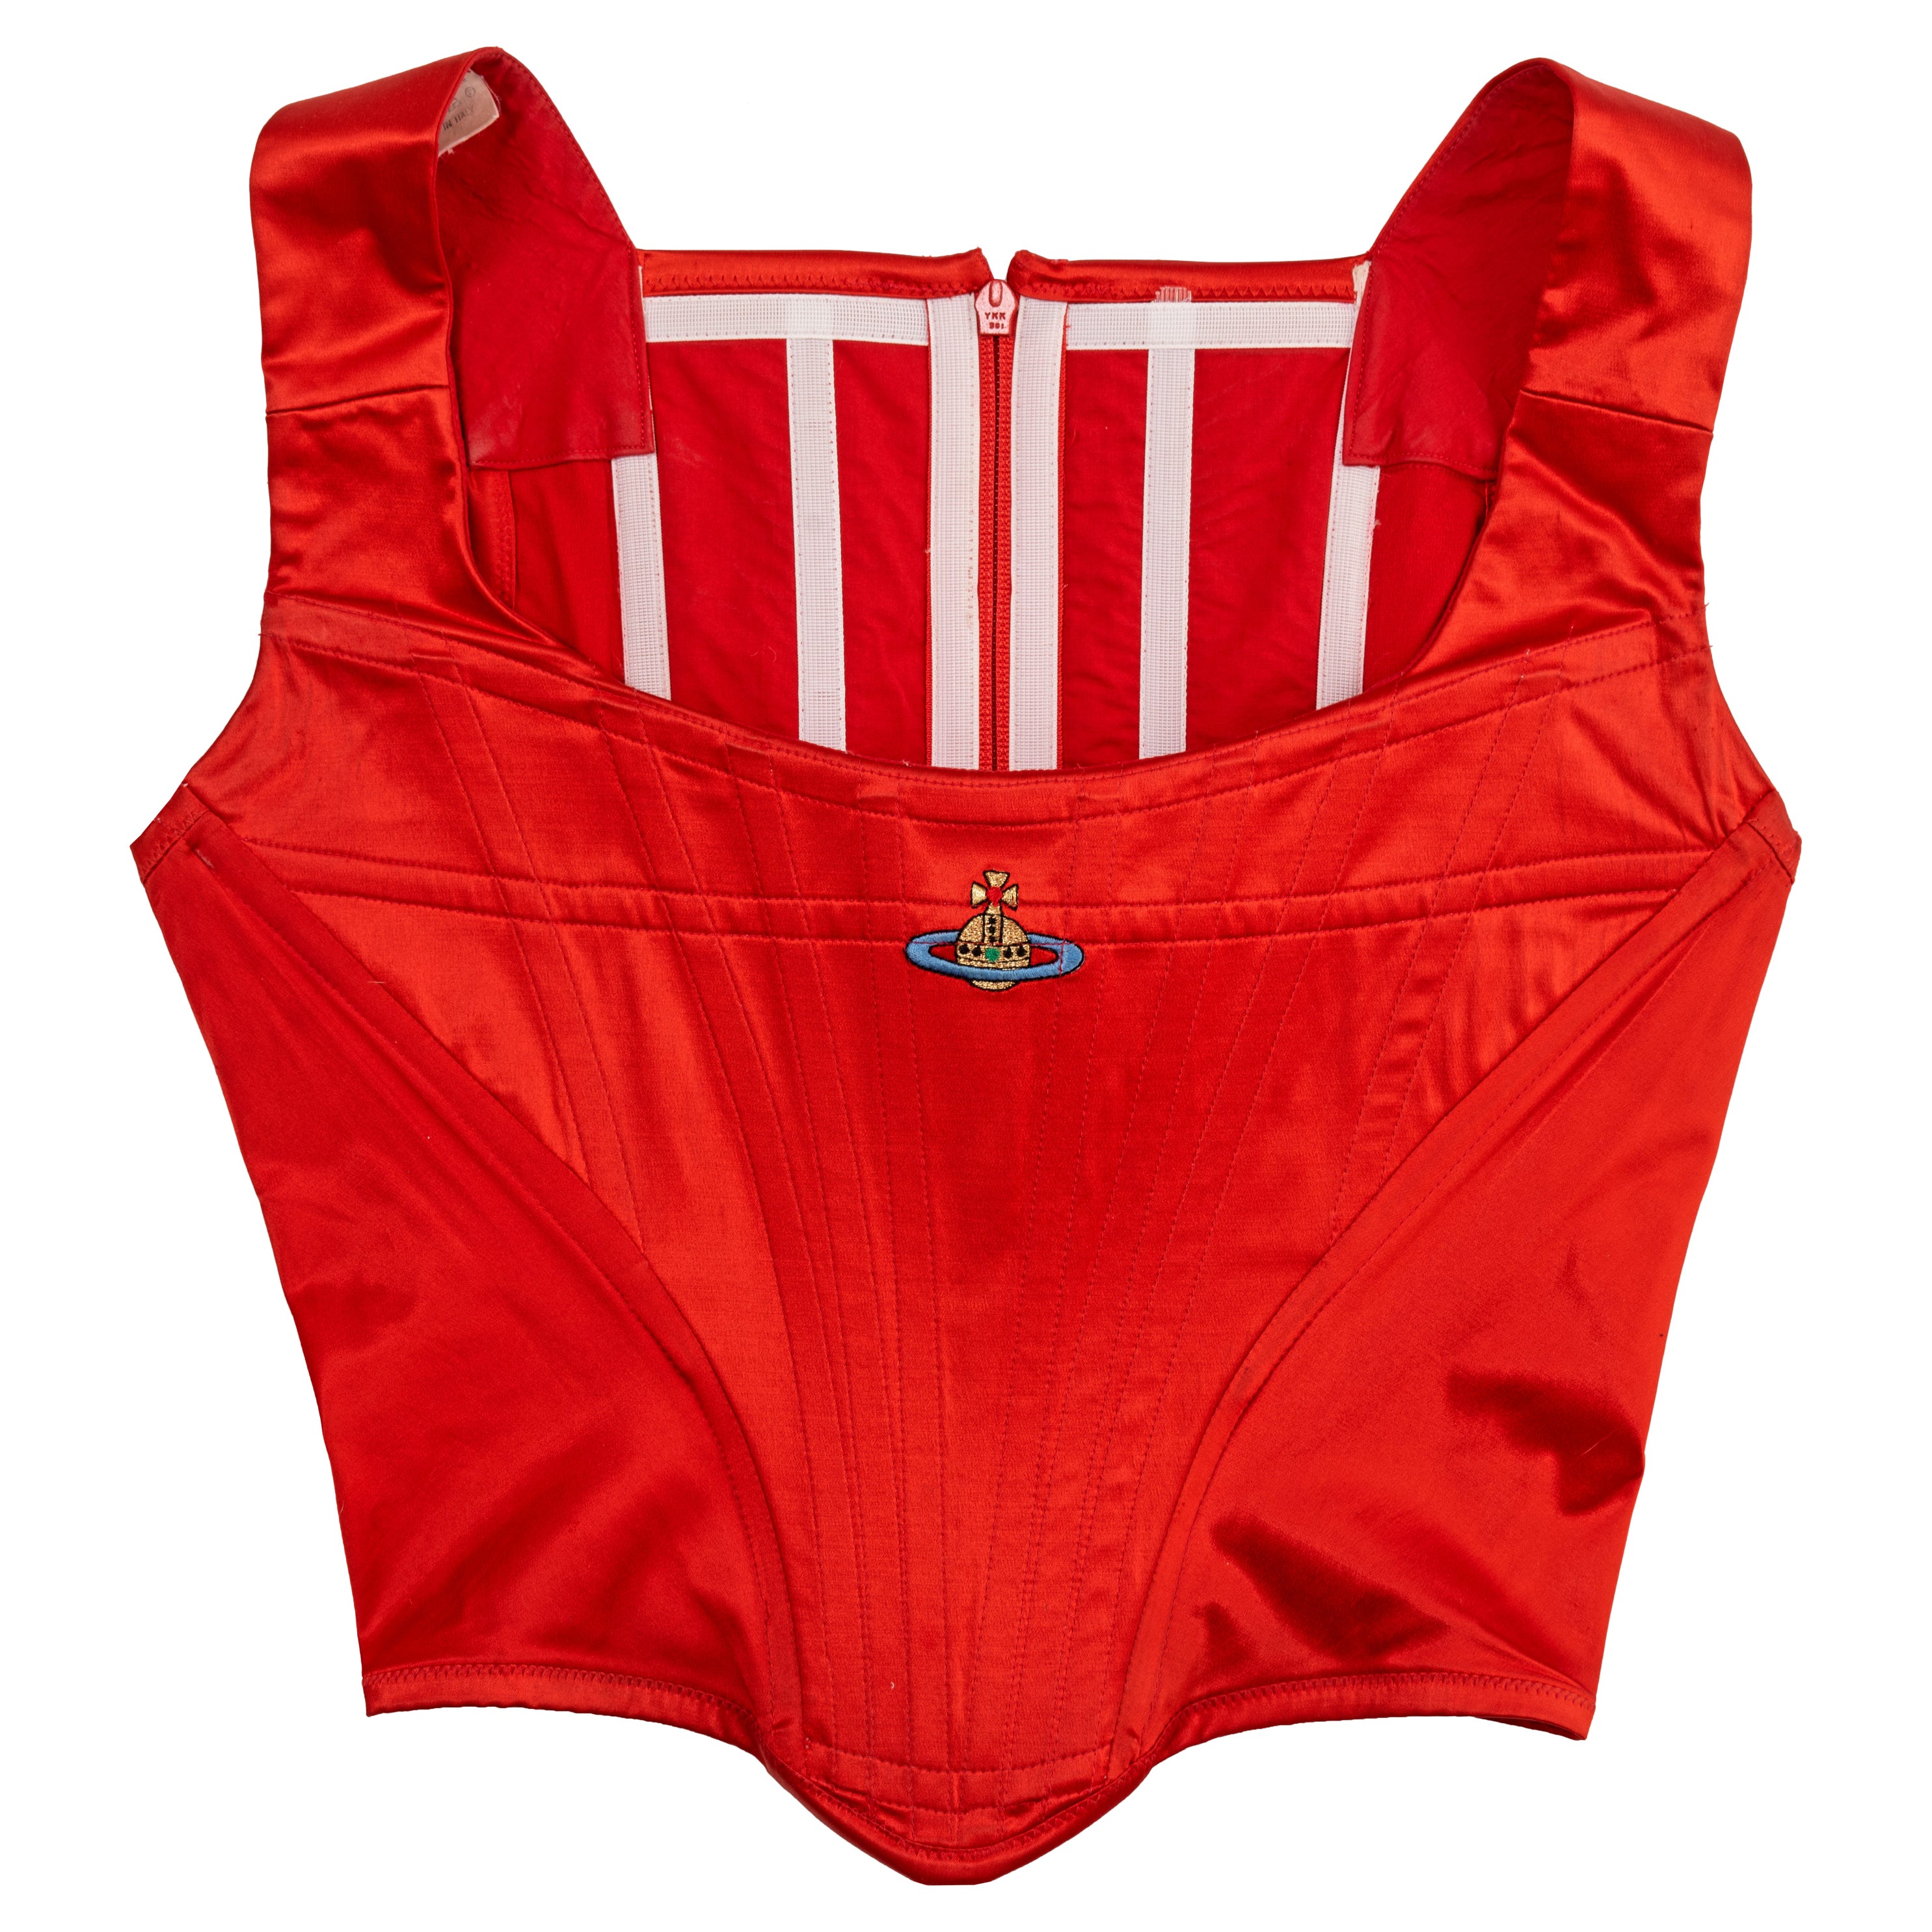 Vivienne Westwood red satin corset with embroidered orb,  c. 1990s For Sale